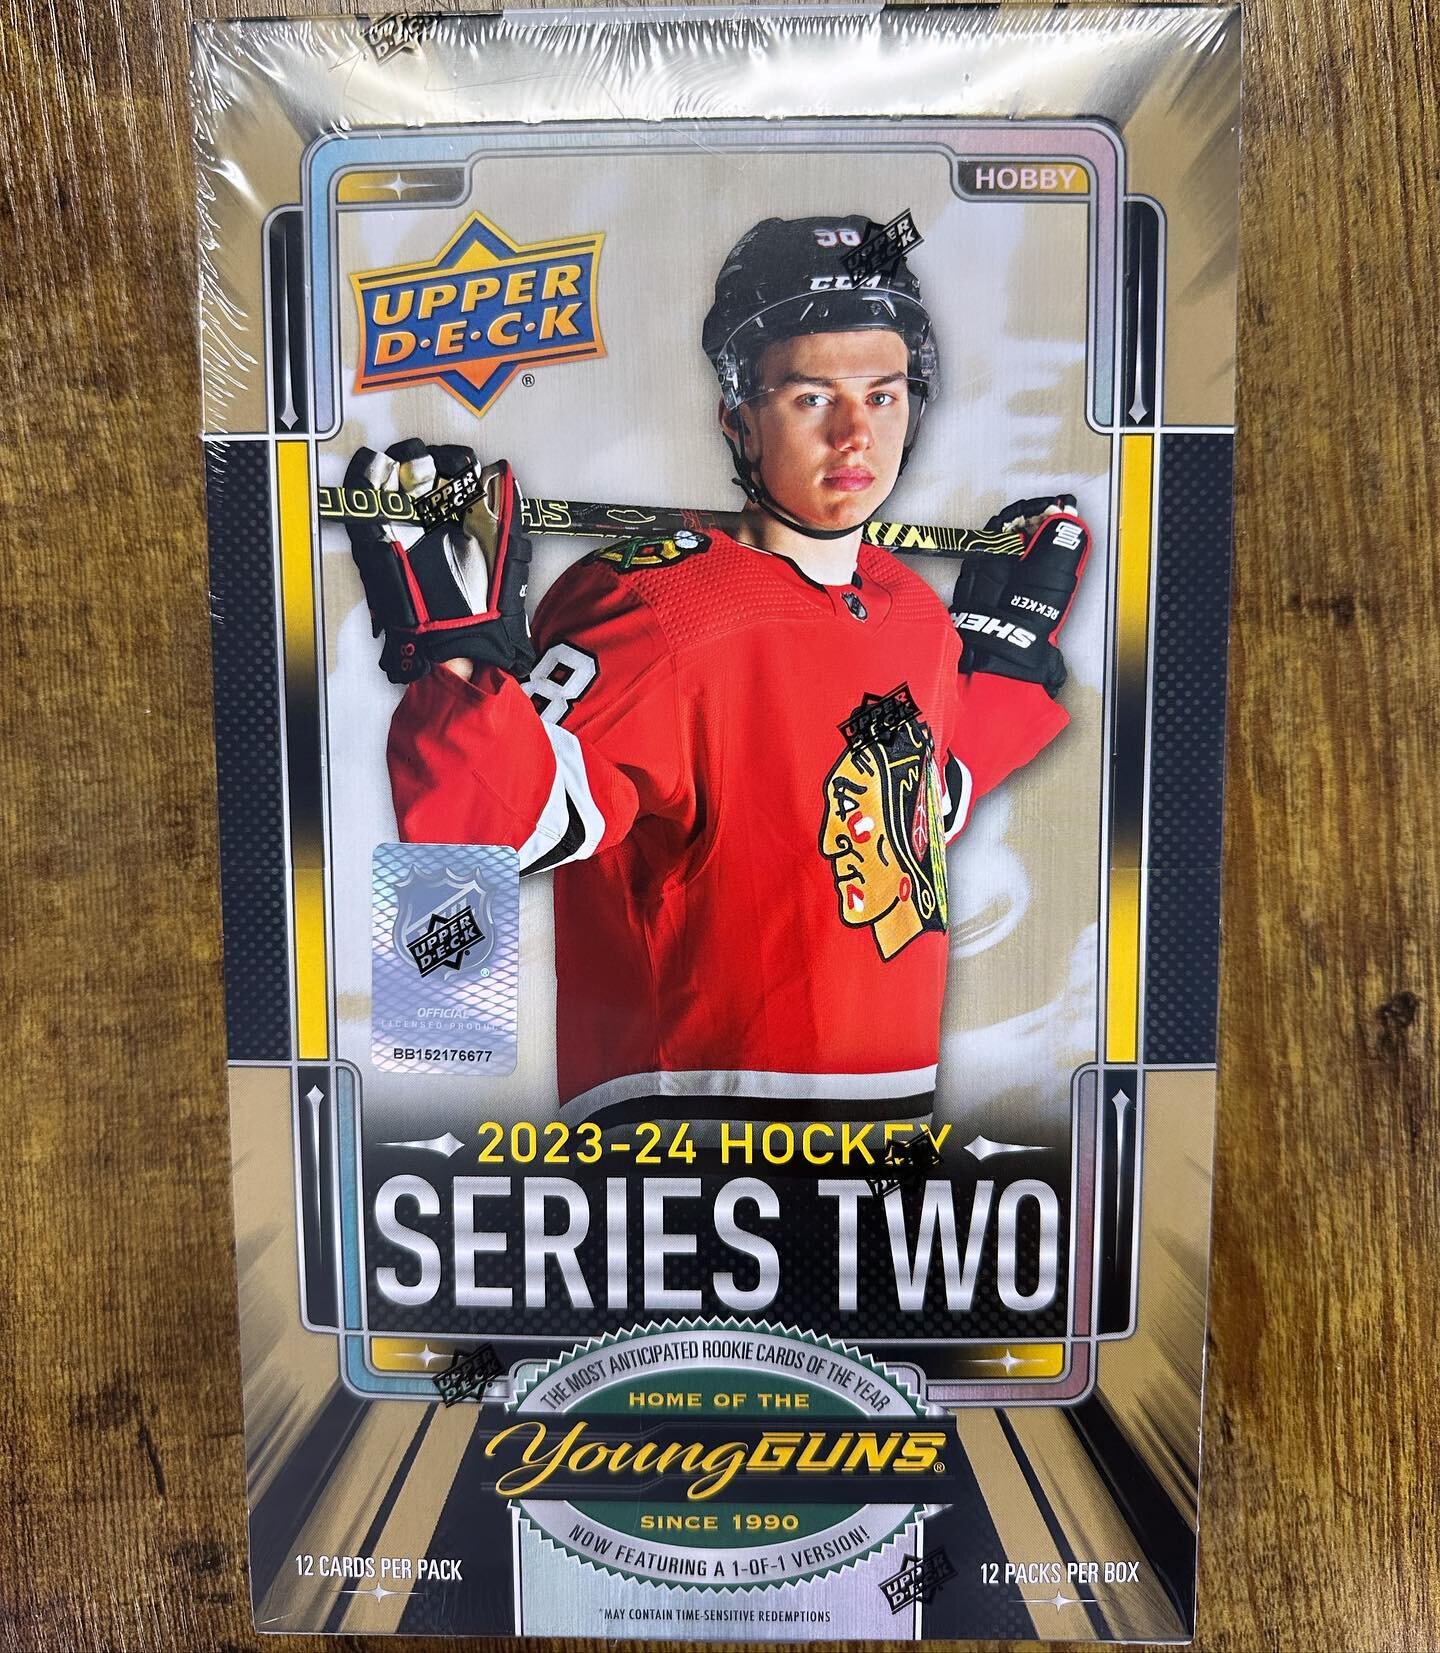 Big hockey release day!!!

2023/24 @upperdecksports Series 2 is out today and in store now!! Packs, Boxes, and Cases available!! 

Come by and try your luck at pulling a Connor Bedard Young Guns!! The first 3 pulled in shop will be sent to PSA for fr